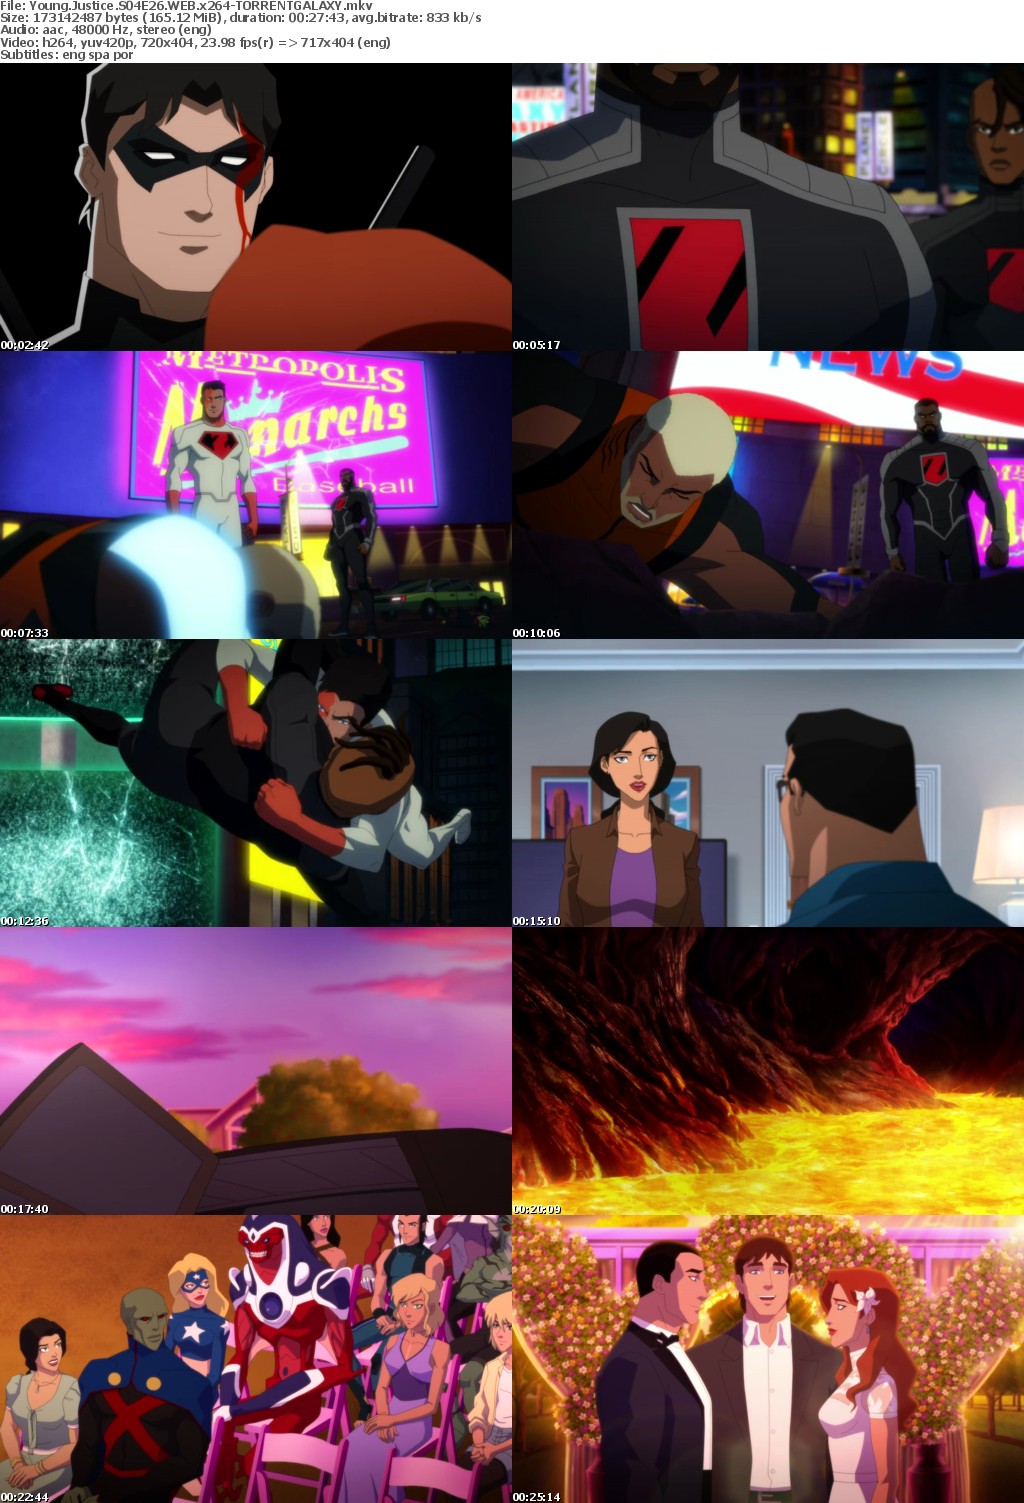 Young Justice S04E26 WEB x264-GALAXY